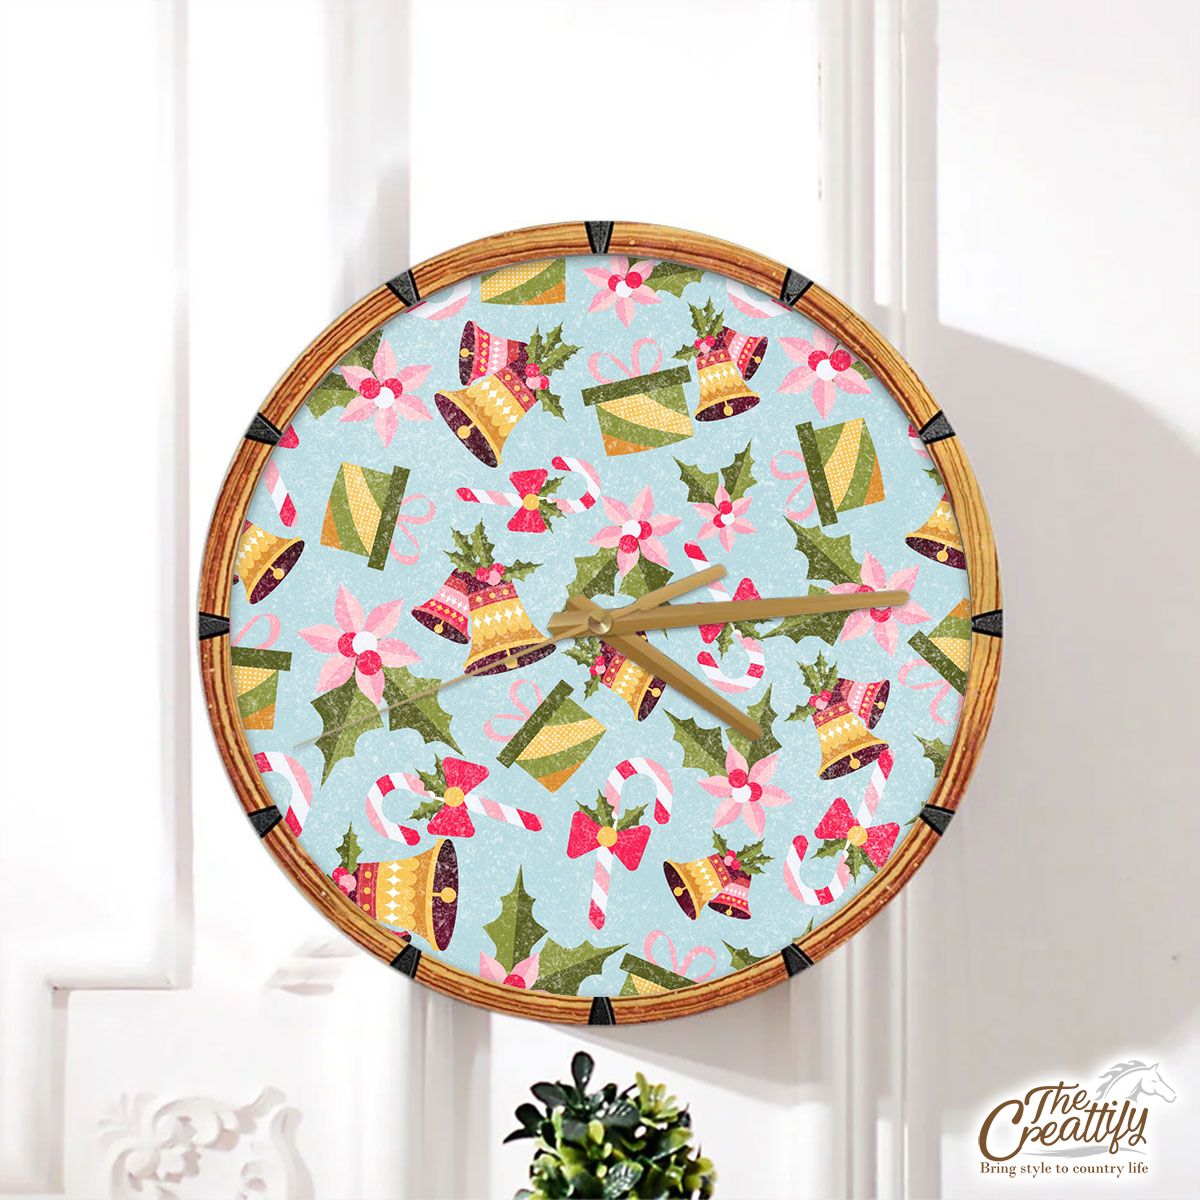 Bells, Christmas Bell And Candy Canes With Christmas Gifts Wall Clock